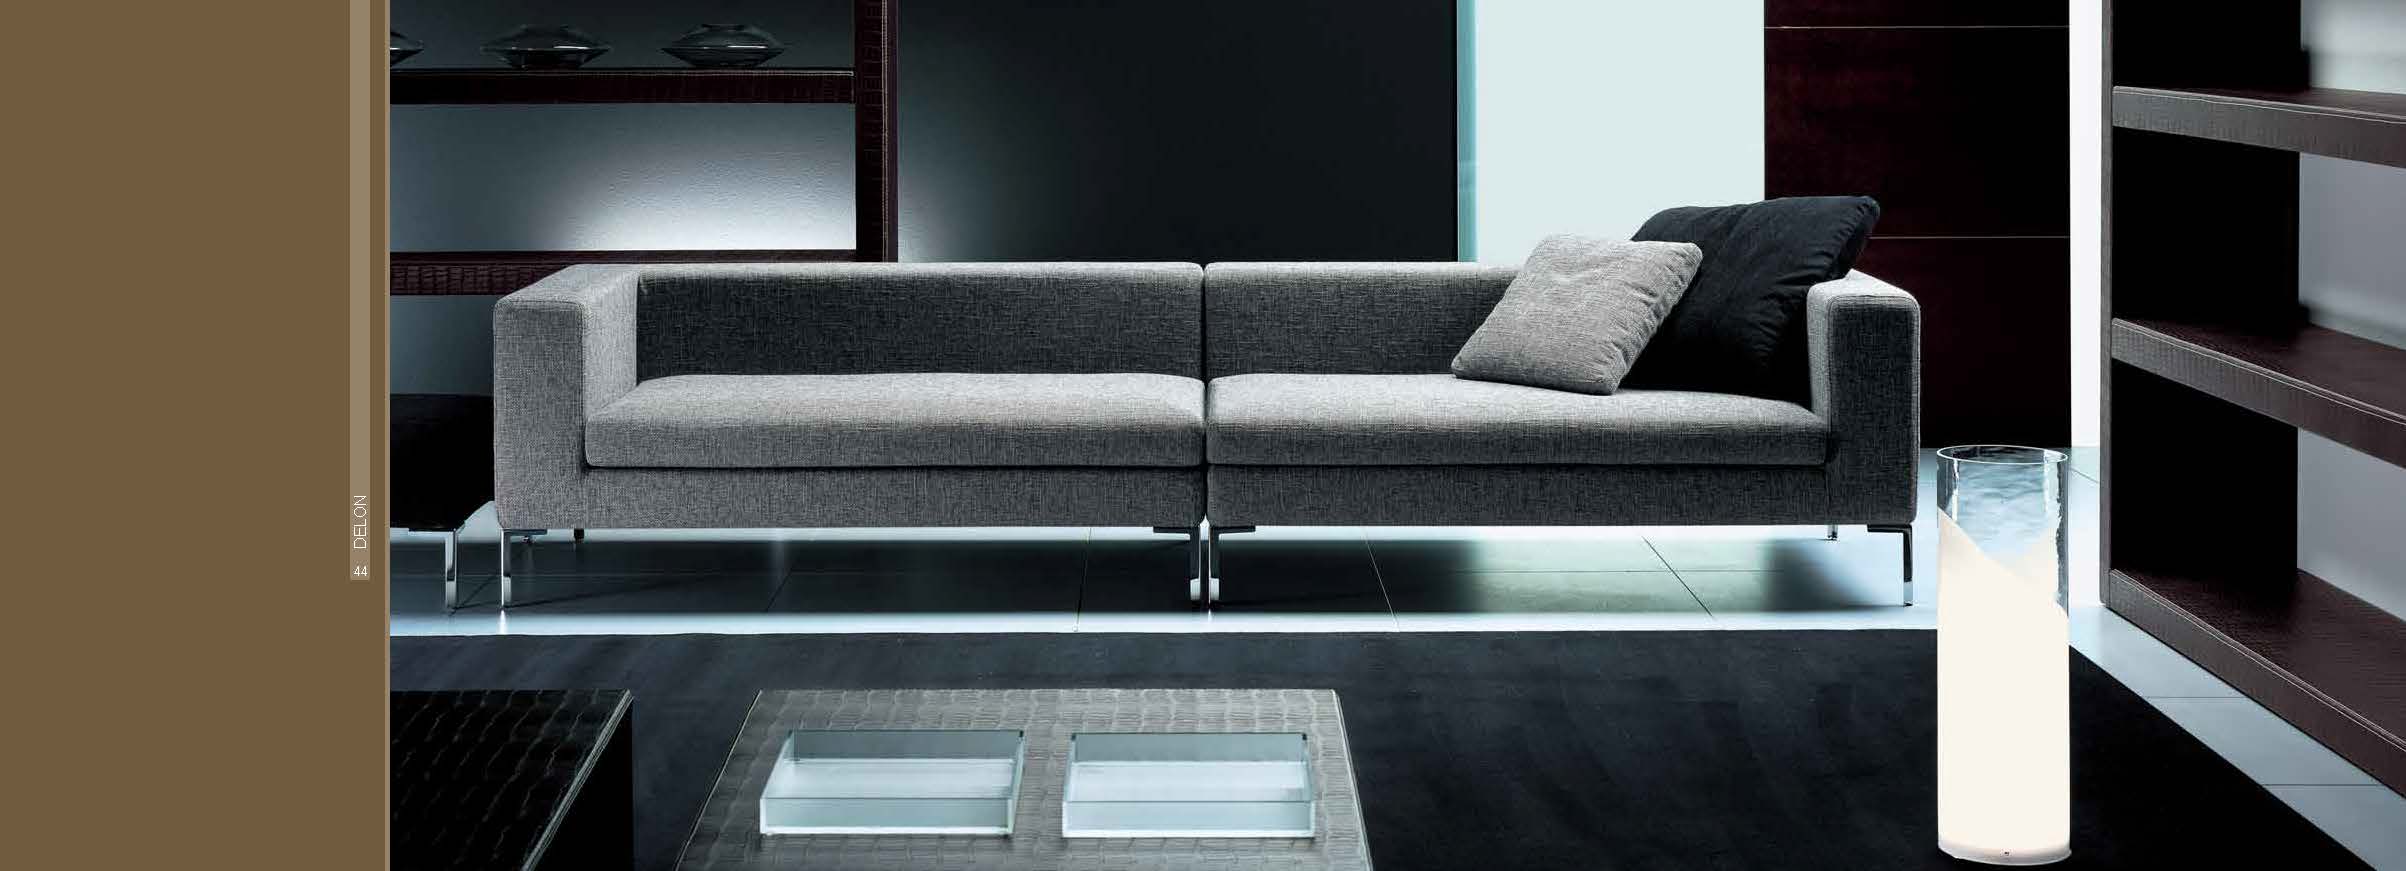 Living Room Furniture Sofas Loveseats and Chairs Delon